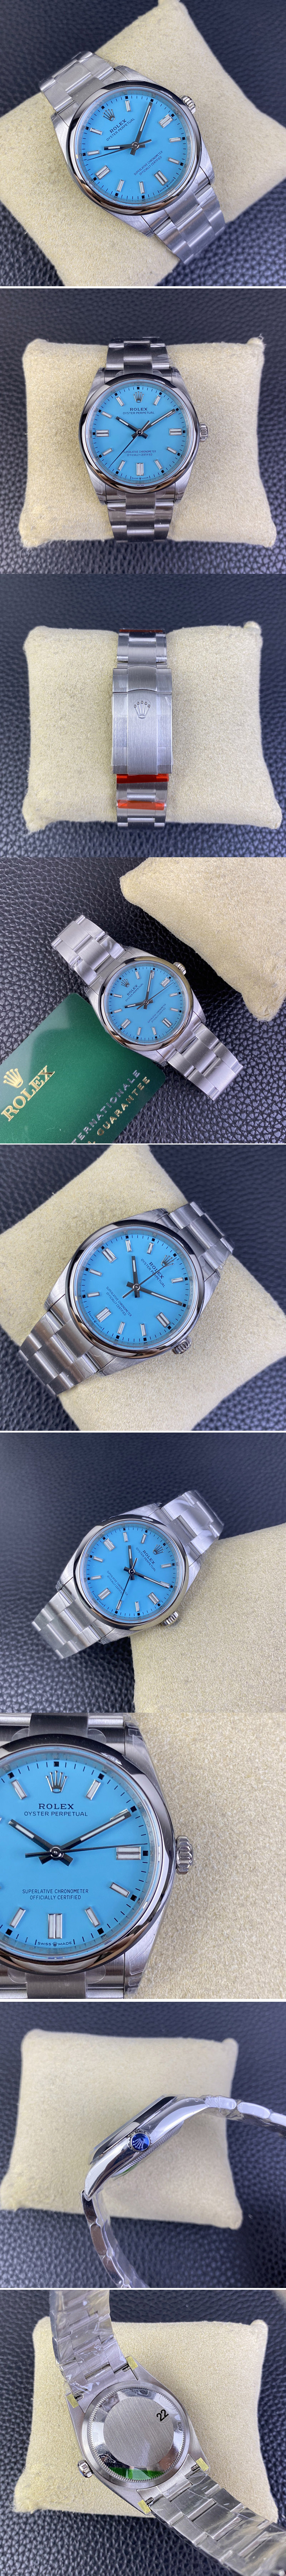 Replica Rolex Oyster Perpetual Watches